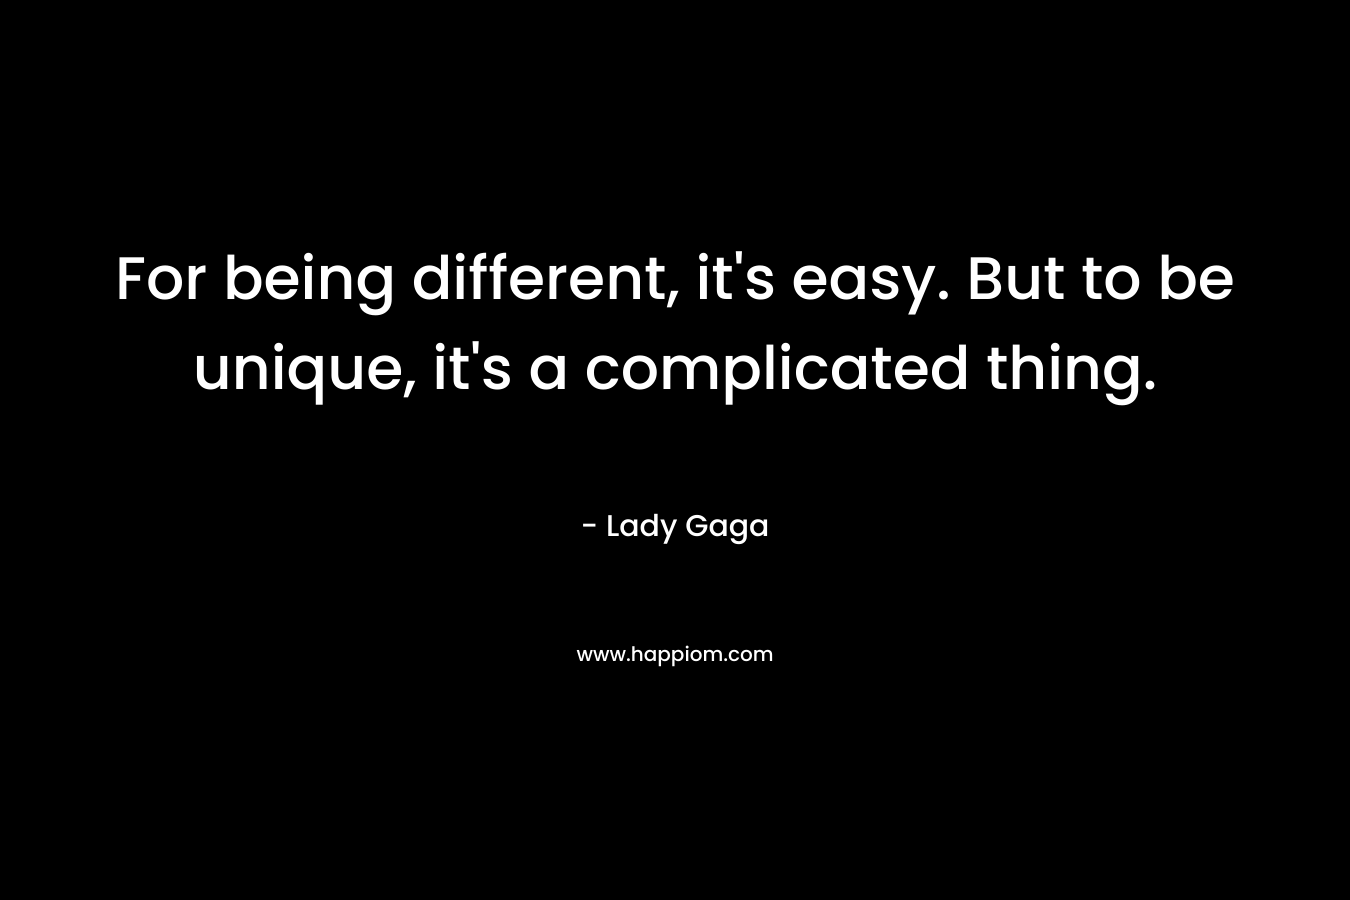 For being different, it’s easy. But to be unique, it’s a complicated thing. – Lady Gaga